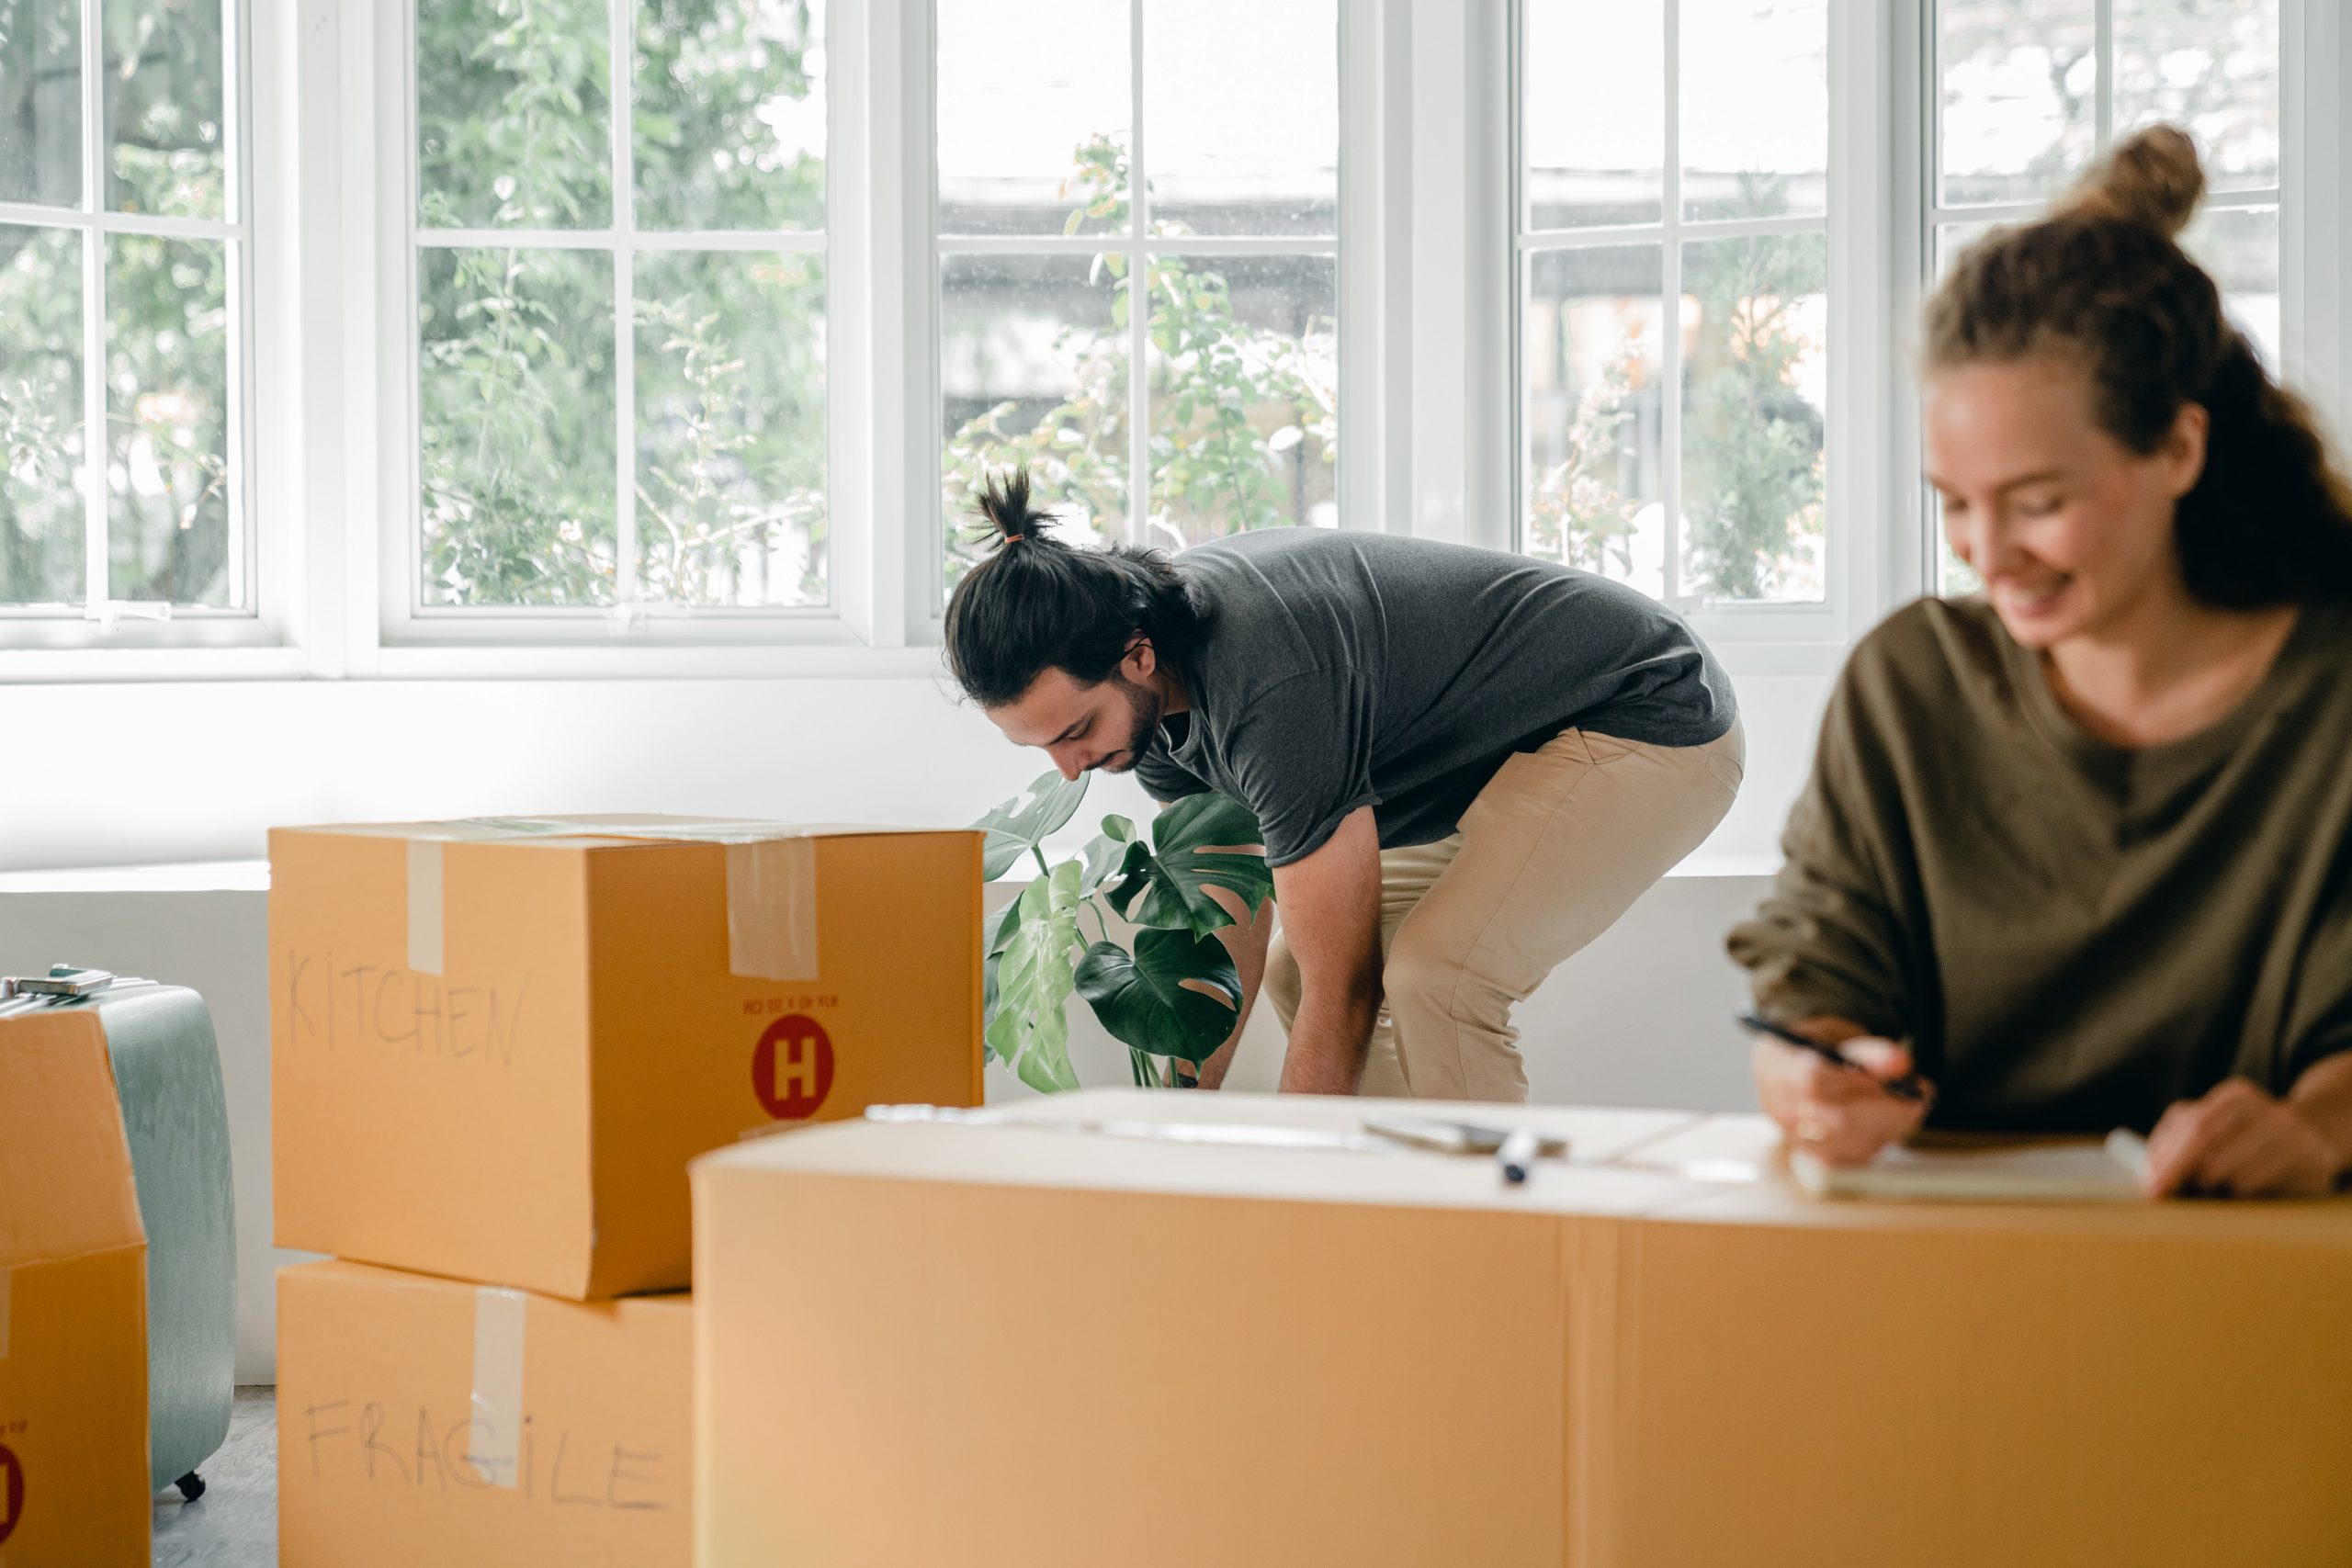 9 Packing Tips for Moving: Where to Start?